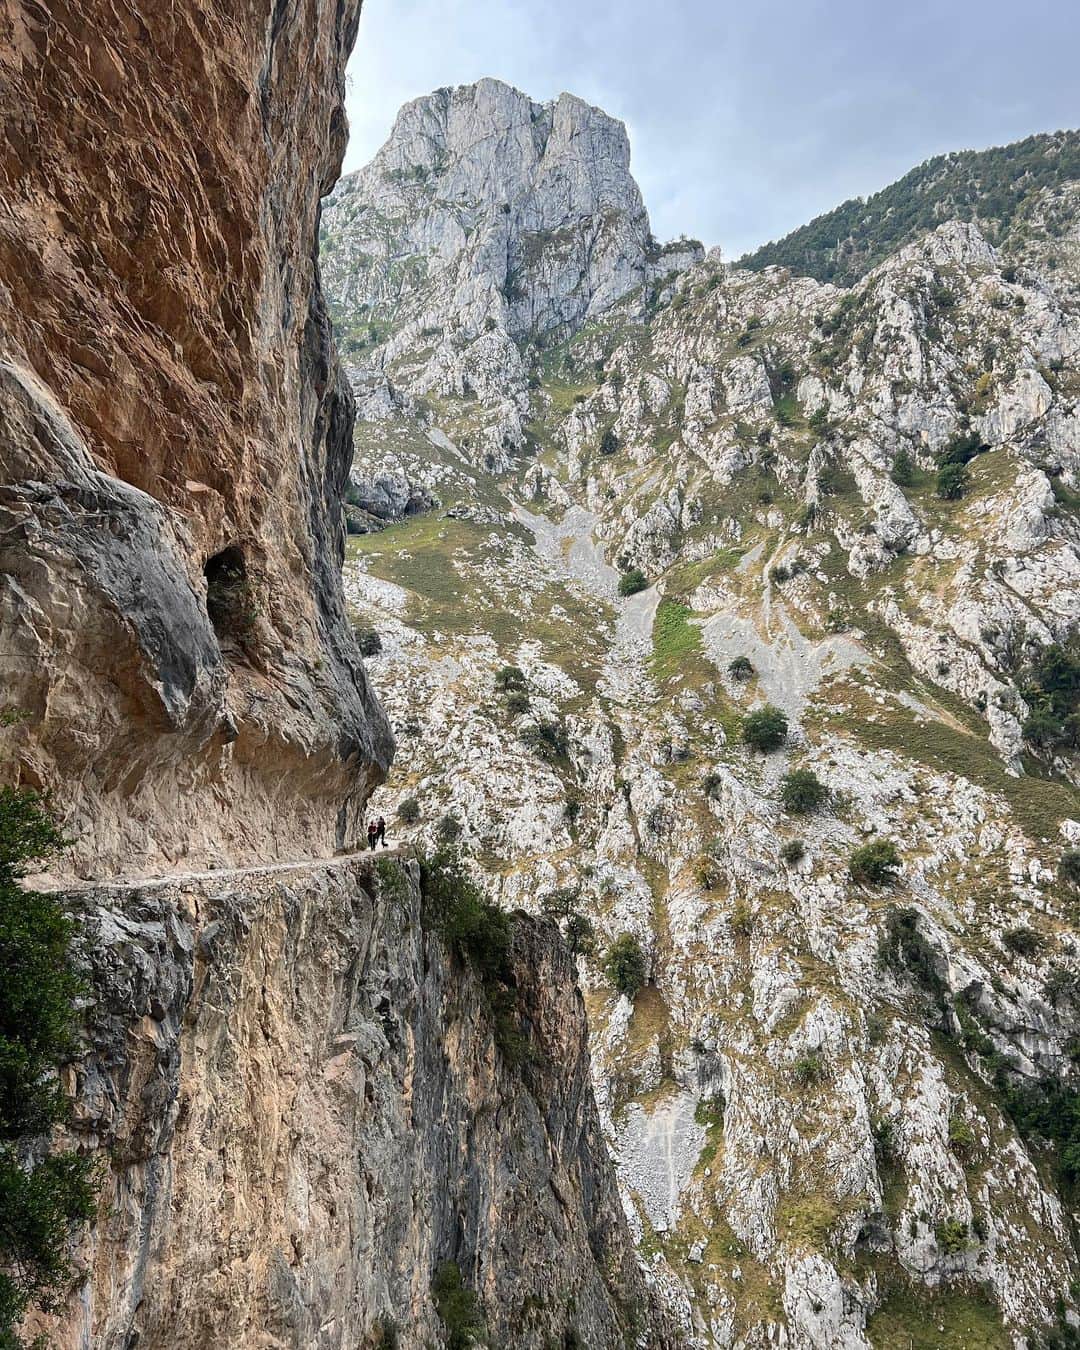 Zanna Van Dijkさんのインスタグラム写真 - (Zanna Van DijkInstagram)「Picos de Europa photo dump + TIPS 🇪🇸   Tag someone you want to visit with! 🏔️   I’ve spent the past 4 days exploring this beautiful national park in northern Spain. I hadn’t heard much about it before we went and honestly it blew me away. It’s jam packed with rugged peaks, epic trails and crystal blue rivers. Divine ✨   1️⃣ Views on the climb to Pico del Arriba. The lesser known routes are poorly marked, so ensure you download a digital GPS map to follow.  2️⃣ Pico del Jierro. Our highest summit, it was a spicy scramble up to the top and the views were INCREDIBLE.  3️⃣ Hiking in Eastern region of the park is the best way to avoid any crowds. It’s super quiet & the landscape is wild.  4️⃣ Olla de San Vicente. A perfect swim spot for a post hike dip, you can literally pull over on the side of the road and hop into the river. It’s super convenient. 5️⃣ An epic cloud inversion above Funte Dé. You can catch a cable car up into the mountains where plenty of hiking routes start. Just make sure you book tickets in advance.  6️⃣ The Puertos de Áliva hike. An easy 14km route with non-stop views. Perfect for a day when your legs are tired. 7️⃣ Ruta del Cares. One of the most popular hikes in Picos de Europa and it’s easy to see why! It’s a moderate hike with phenomenal scenery. Just make sure you arrive super early to secure a parking spot.  8️⃣ The Ruta del Cares weaves through a gorge, with the path often being built into the mountain walls or passing through tunnels.  9️⃣ There’s SO many friendly goats in the mountains. Plus horses, cows and donkeys. It’s honestly animal heaven!  🔟 Potes. The most quaint mountain town. The architecture is gorgeous and there’s even a river you can take a dip in.   I will share a complete travel guide to Picos de Europa on my website soon 🥾 Shoutout to @moonhoneytravelers for inspiring this trip 🫶🏼 #picosdeeuropa #asturias #picosdeeuropanationalpark #asturiasgram #cantabria」8月21日 17時34分 - zannavandijk